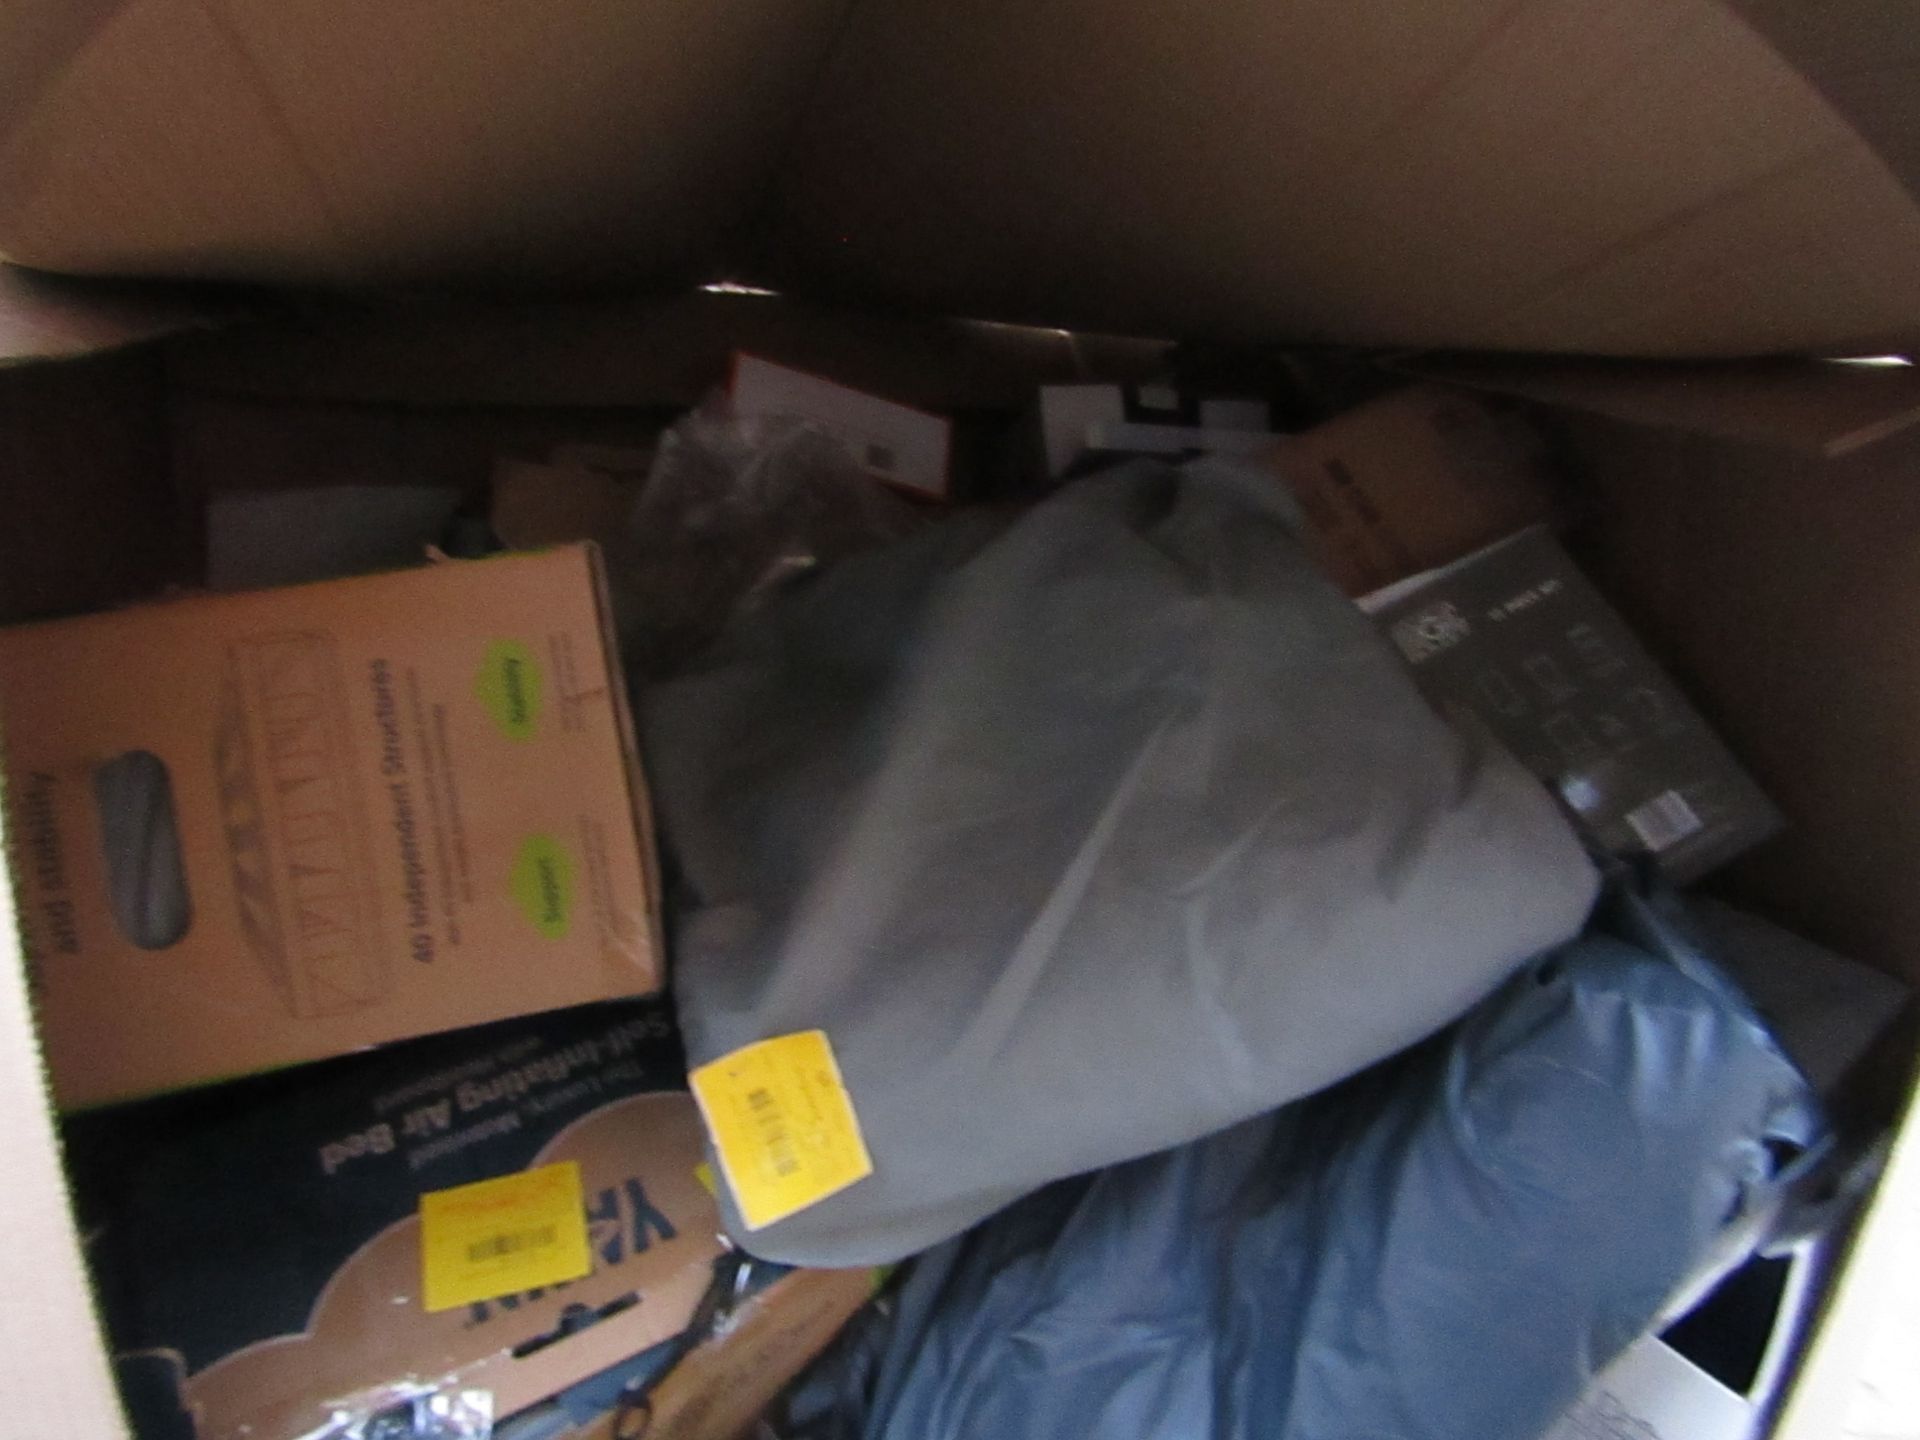 | 1X | PALLET  OF UNMANIFESTED ELECTRICAL ITEMS, ALL RAW CUSTOMER RETURNS SOME MAY BE LOOSE OR IN